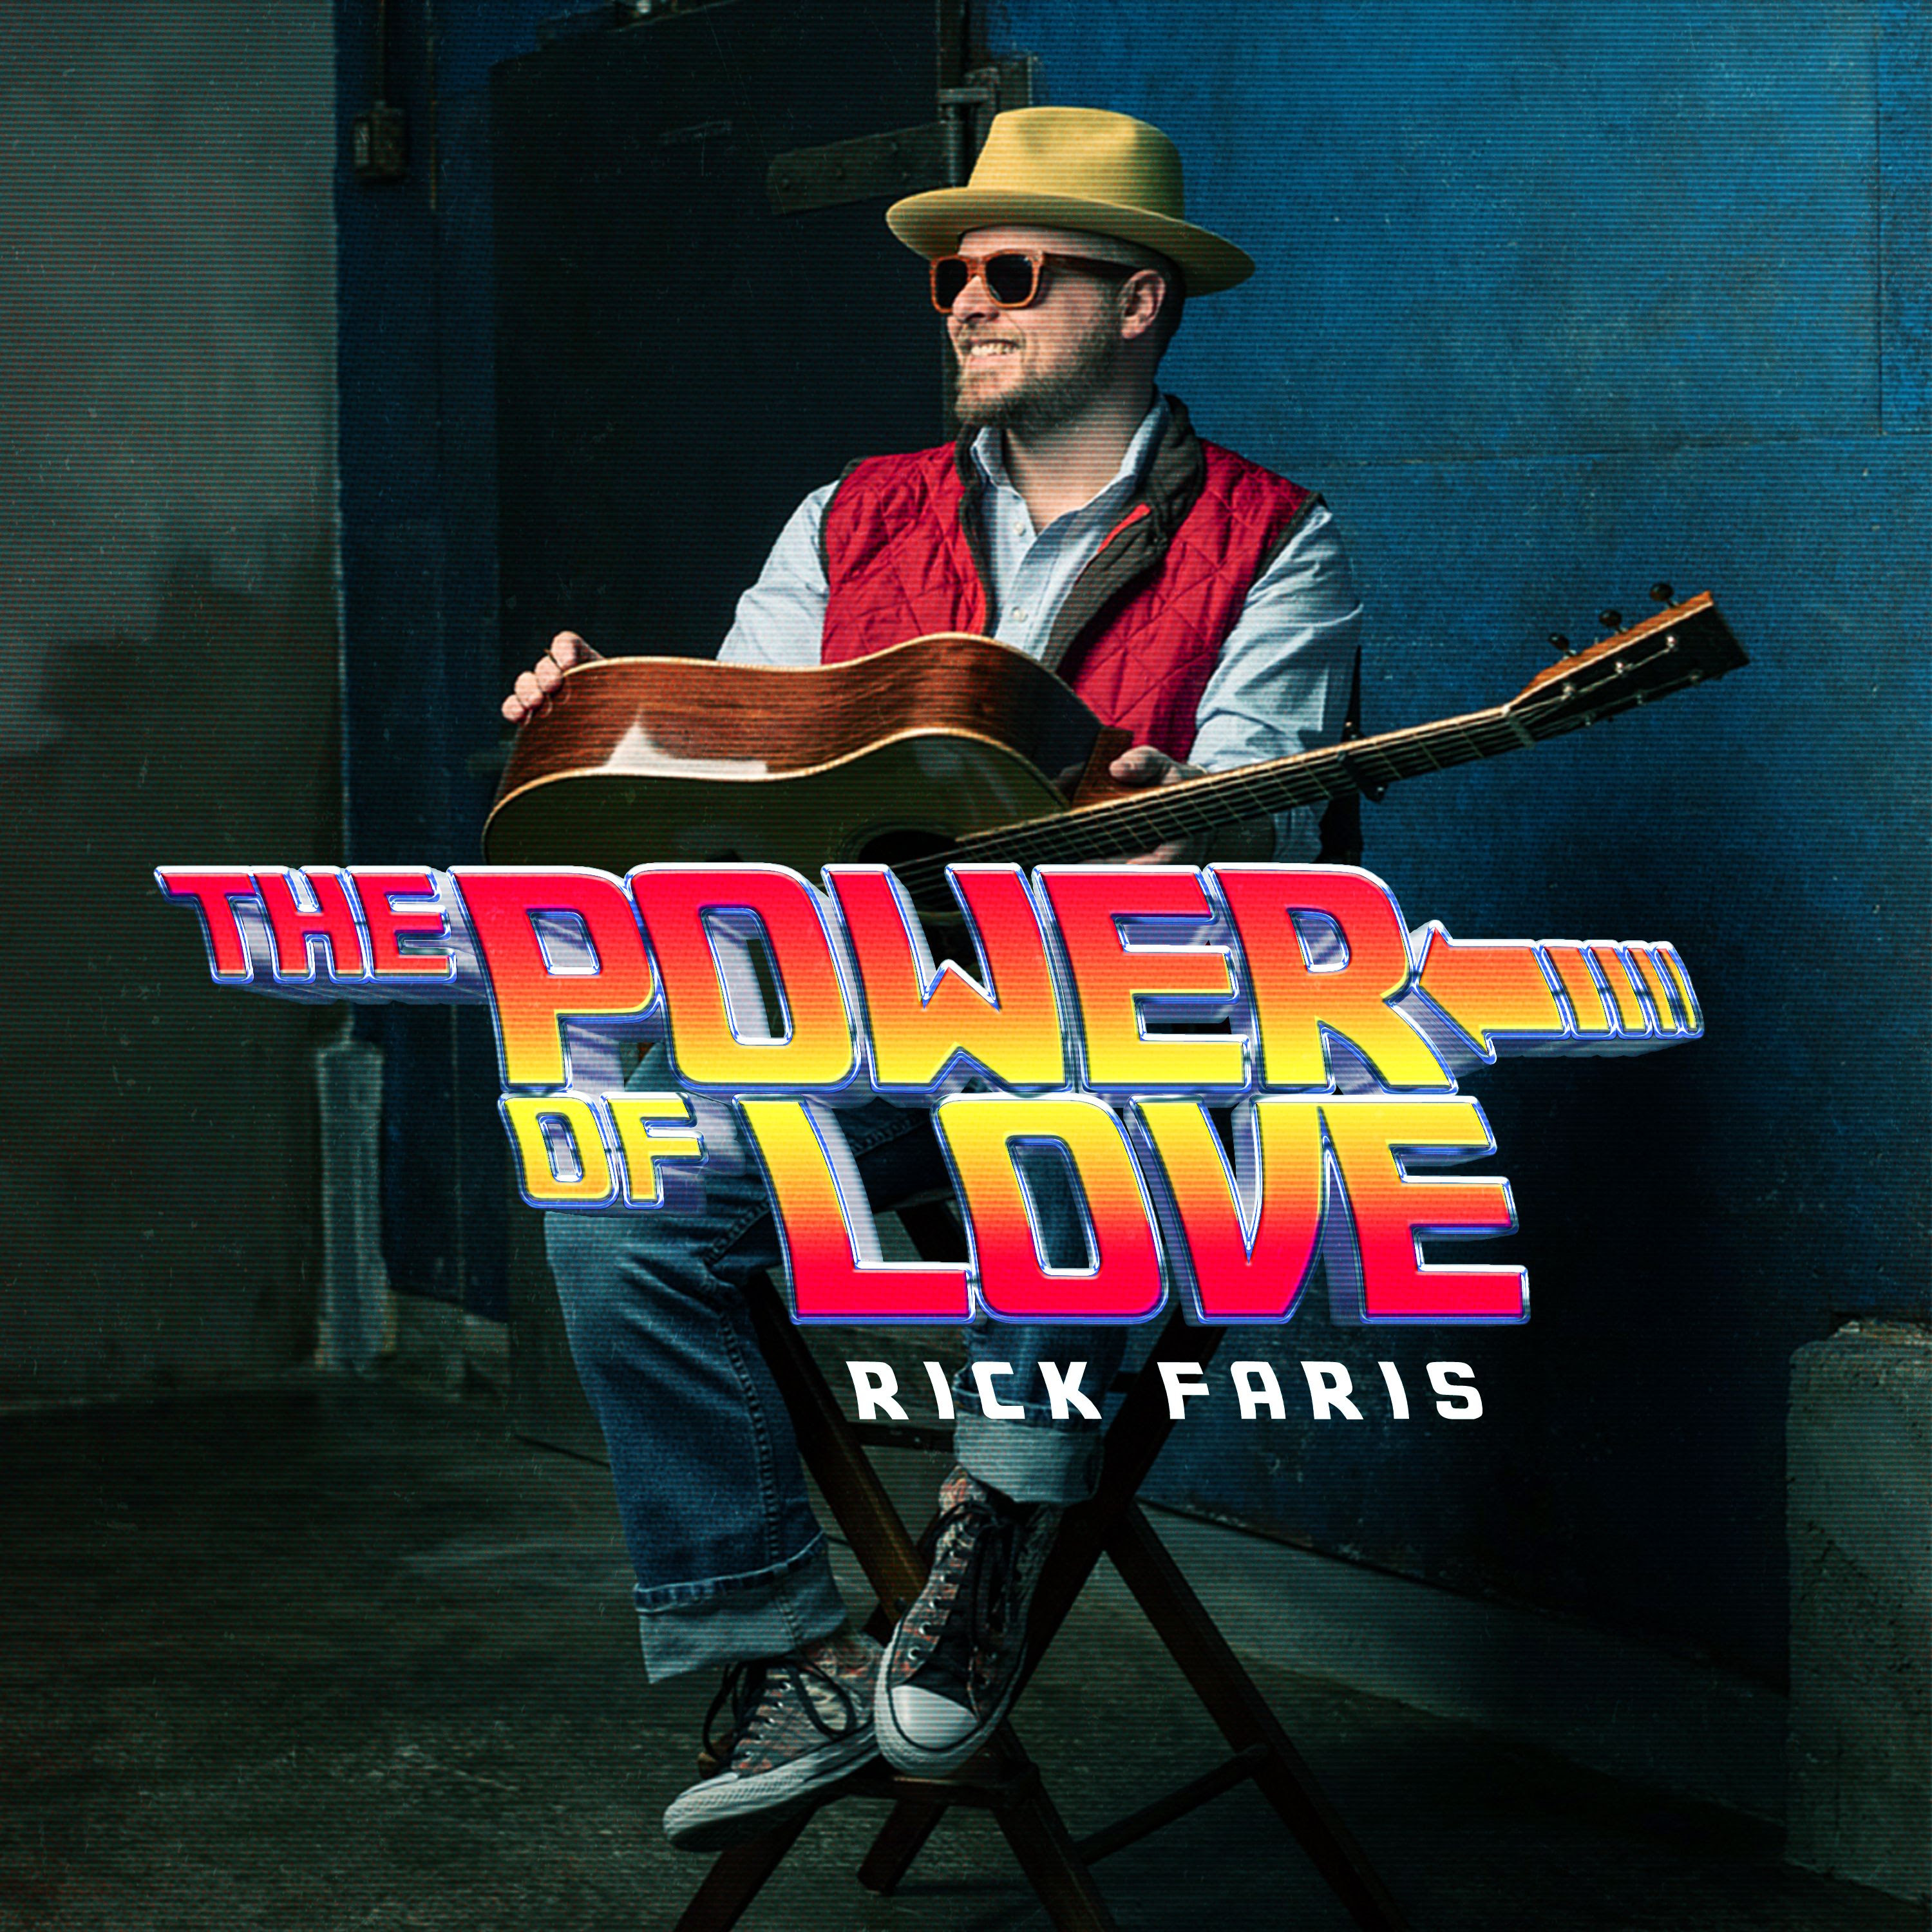 Rick Faris releases new single and music video "The Power Of Love"